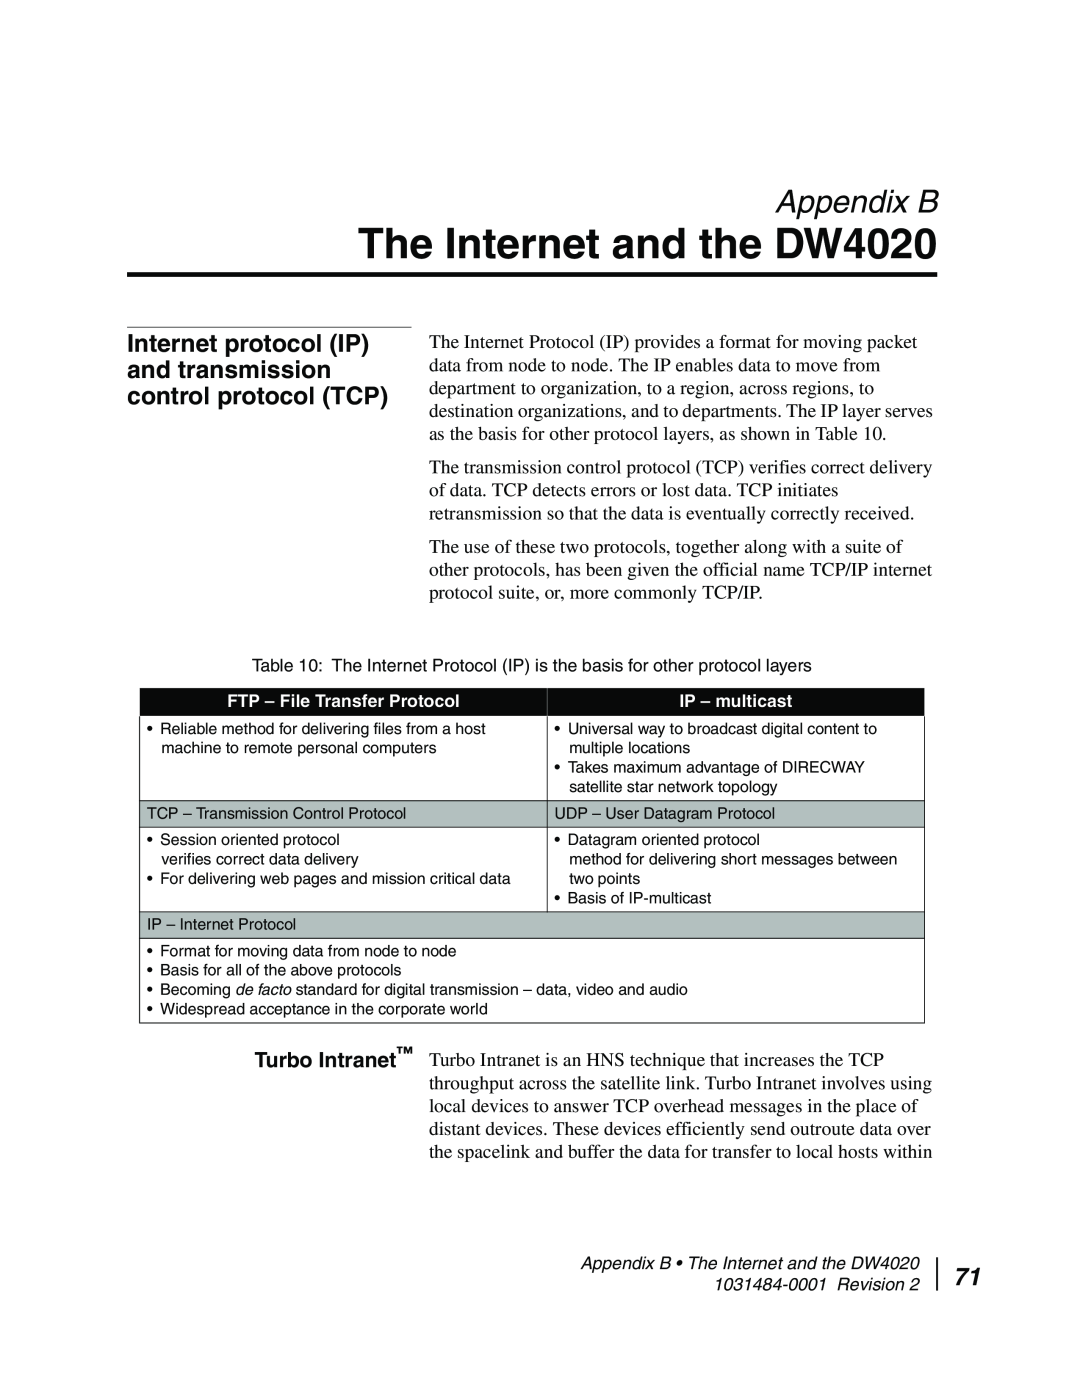 Hughes manual The Internet and the DW4020, Appendix B, Internet protocol IP and transmission control protocol TCP 